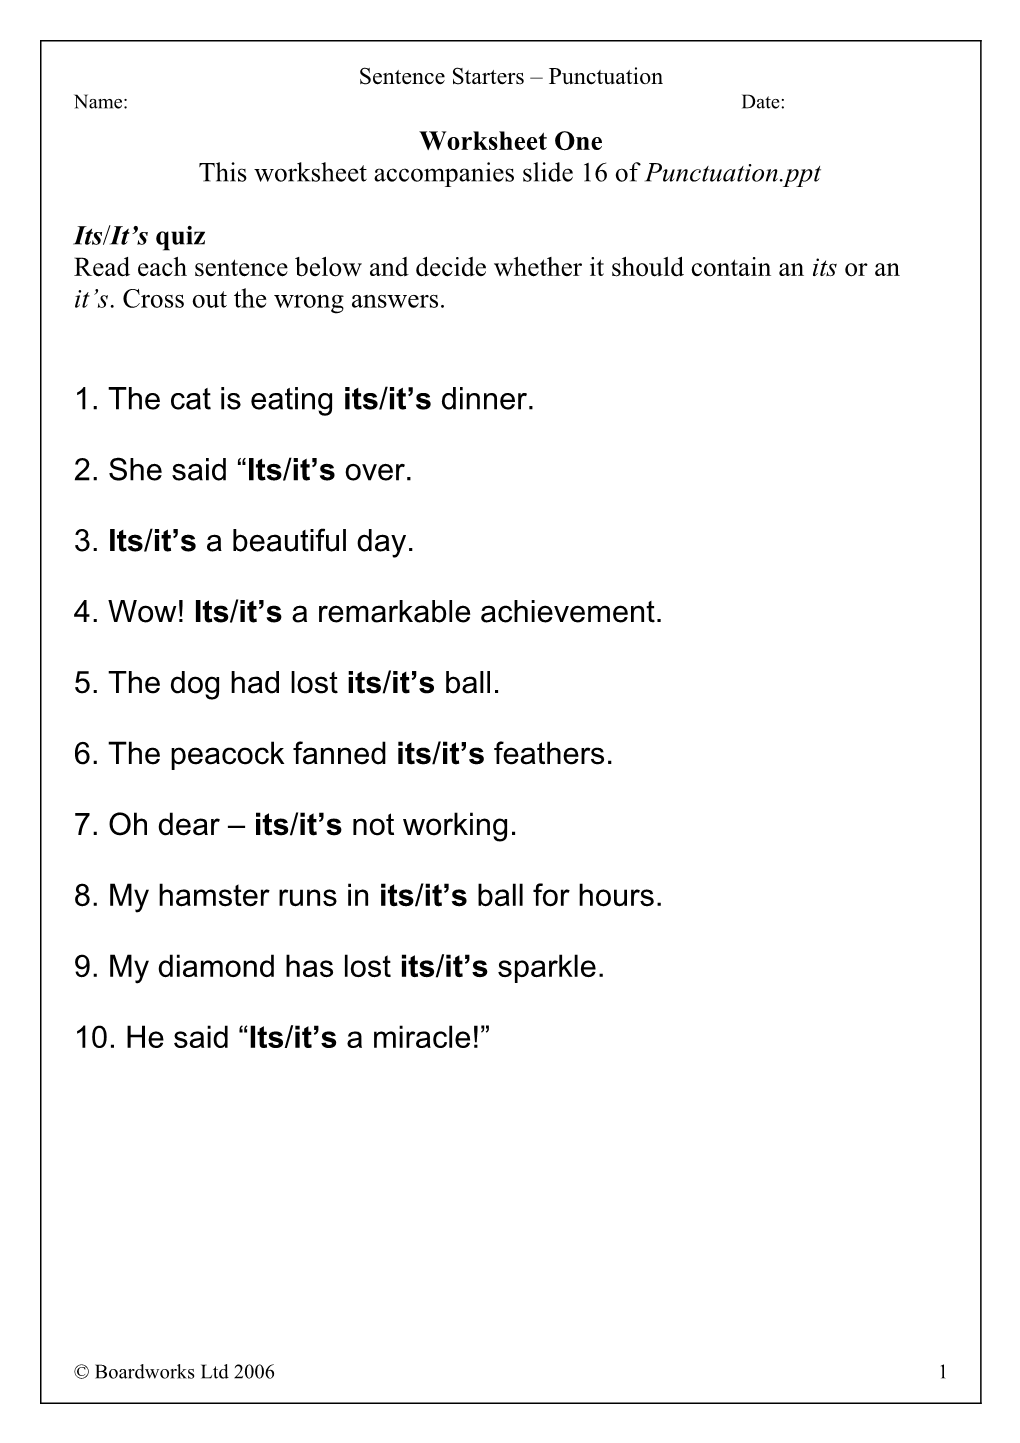 This Worksheet Accompanies Slide 16 of Punctuation.Ppt